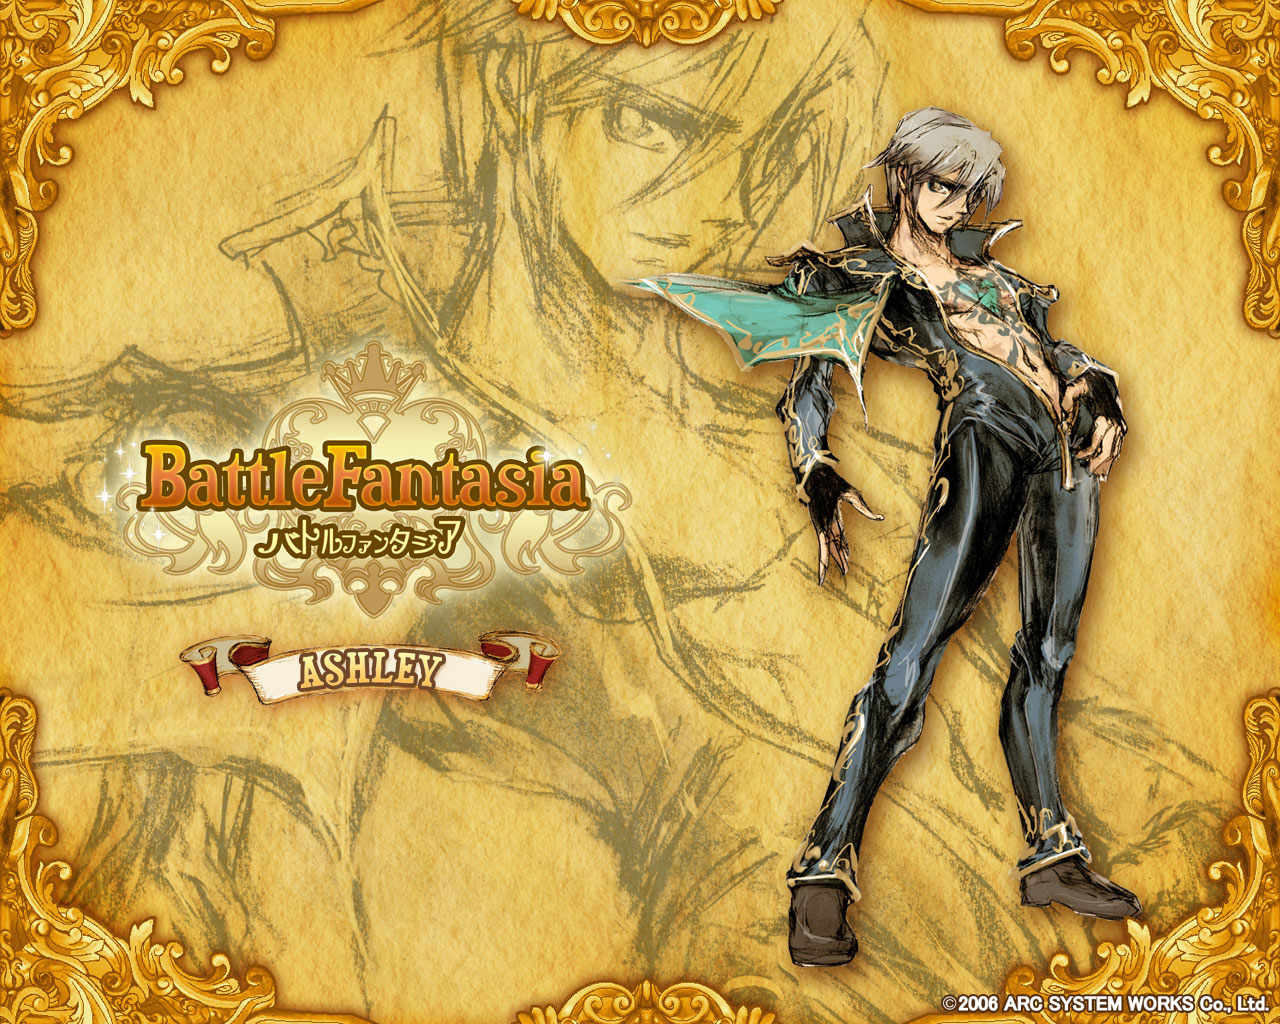 High Resolution Wallpaper | Battle Fantasia -Revised Edition- 1280x1024 px